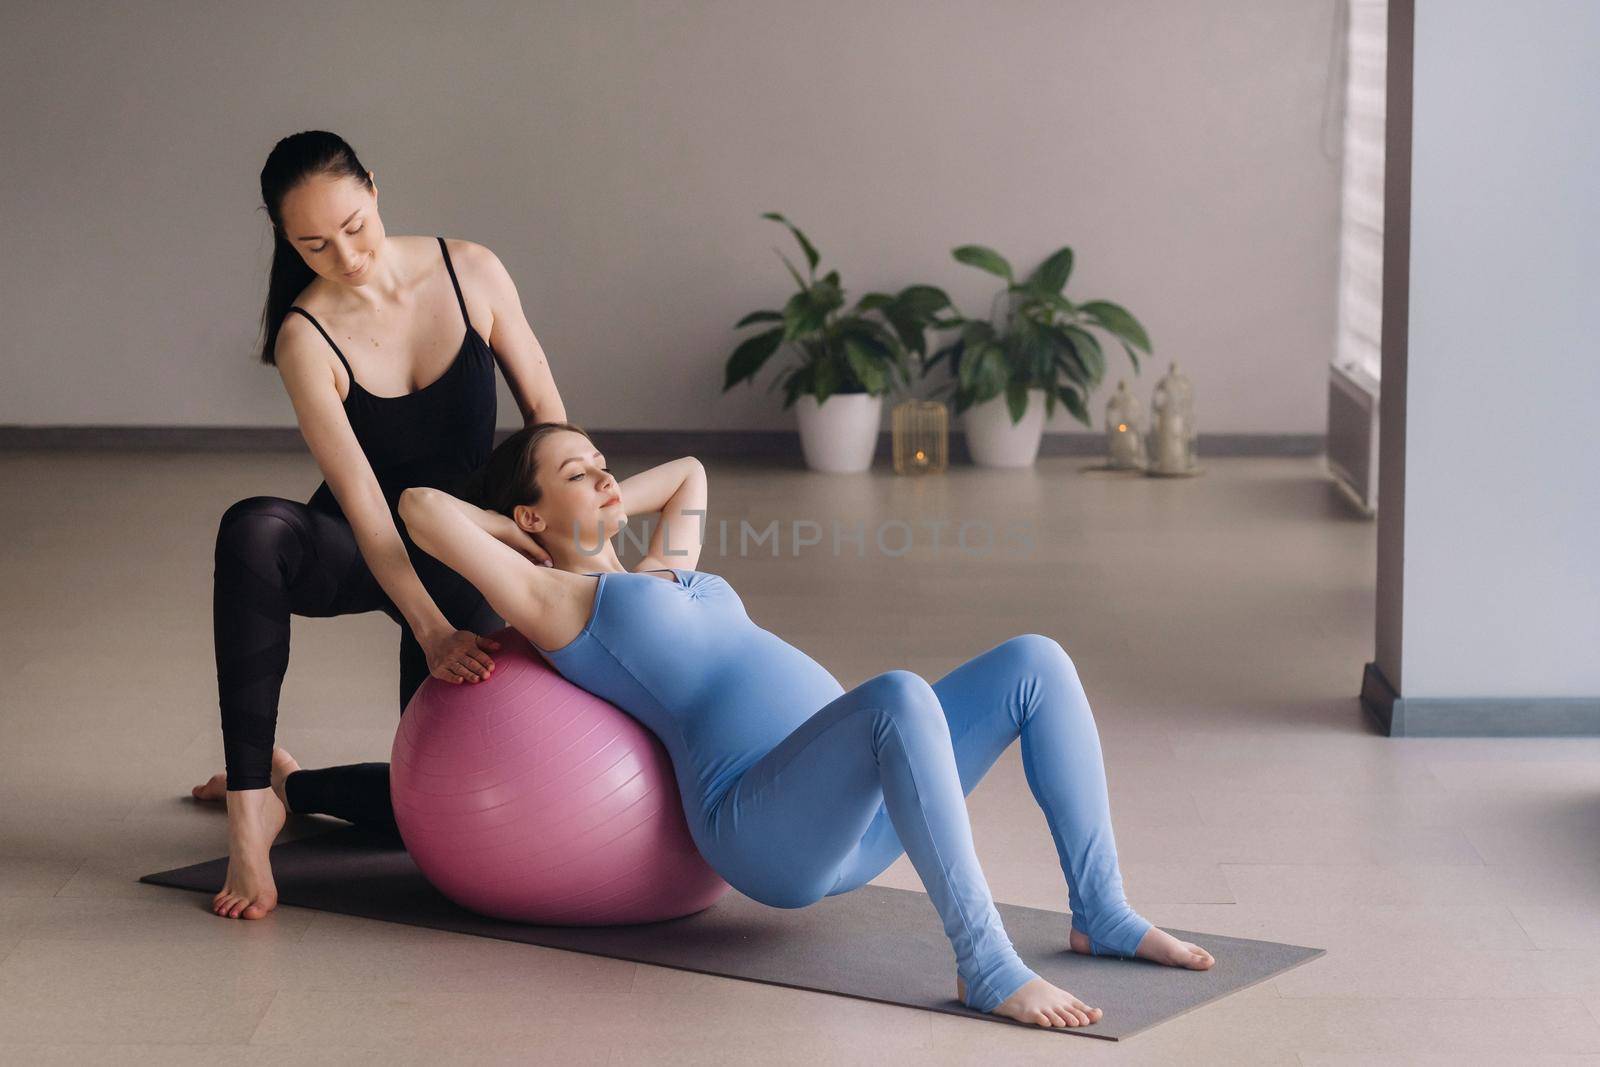 Pregnant woman with a trainer during fitness classes with a ball.